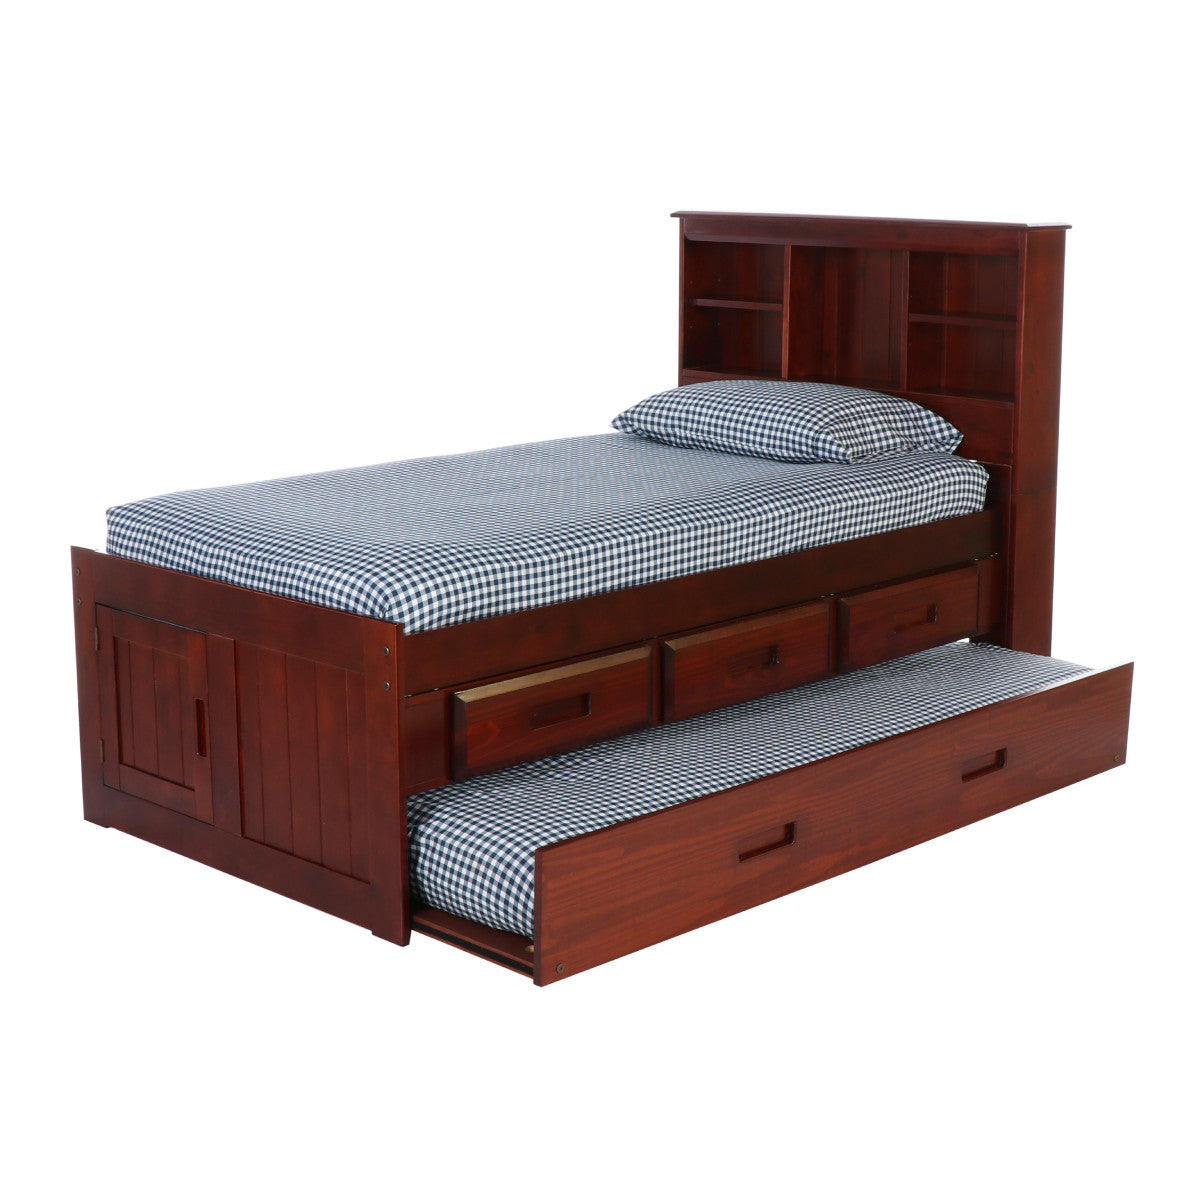 TWIN BOOKCASE BED WITH 3 DRAWER STORAGE AND TWIN TRUNDLE BED IN MERLOT FINISH